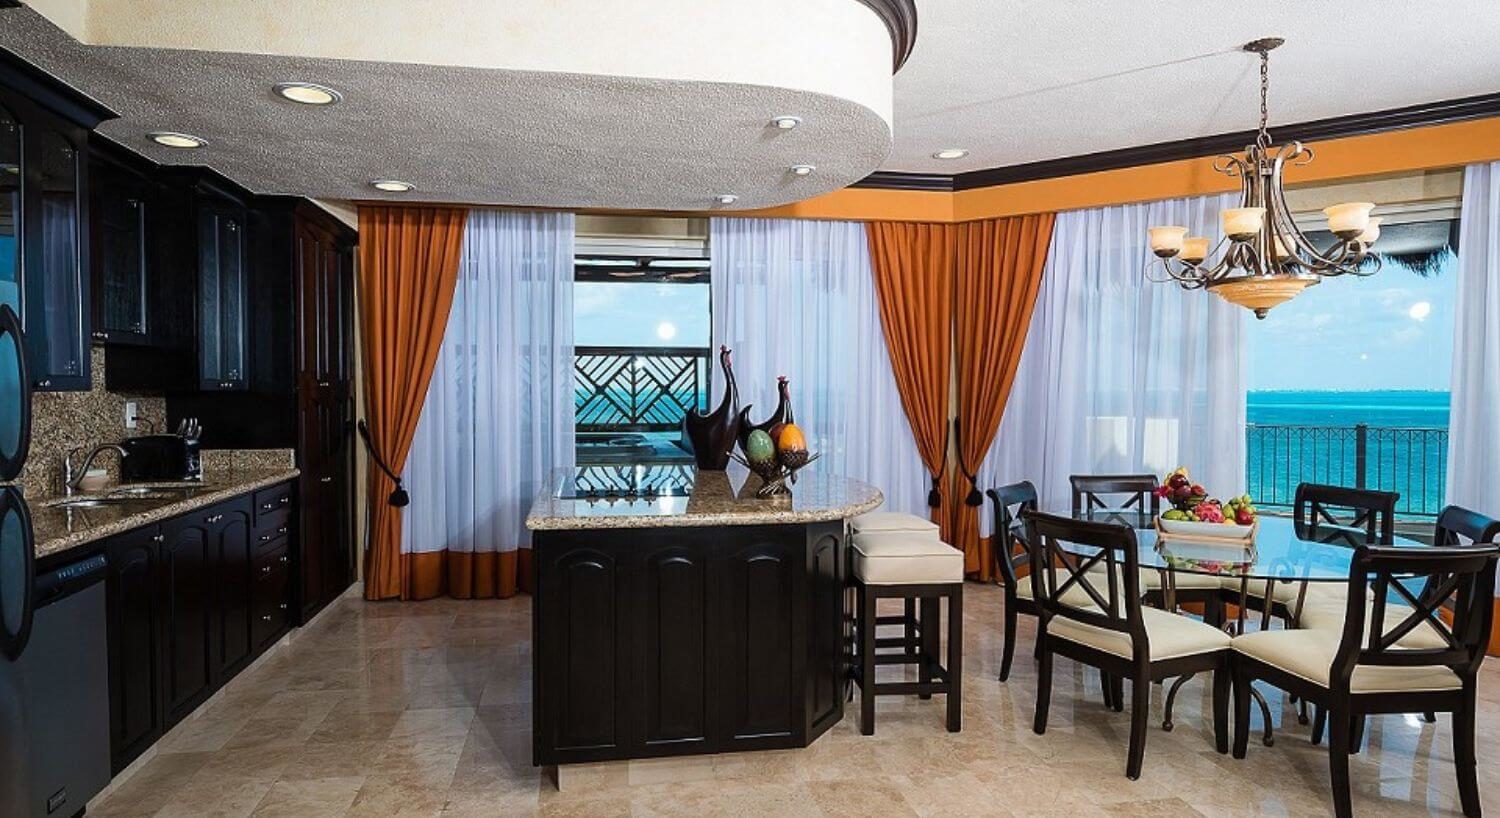 A gourmet kitchen and dining area with dark wood cupboards, granite countertops, an island with barstools, a round glass dining table with comfortable chairs, and sliding doors leading out to a wrap around terrace with a hot tub and the turquoise waters of the Caribbean sea.